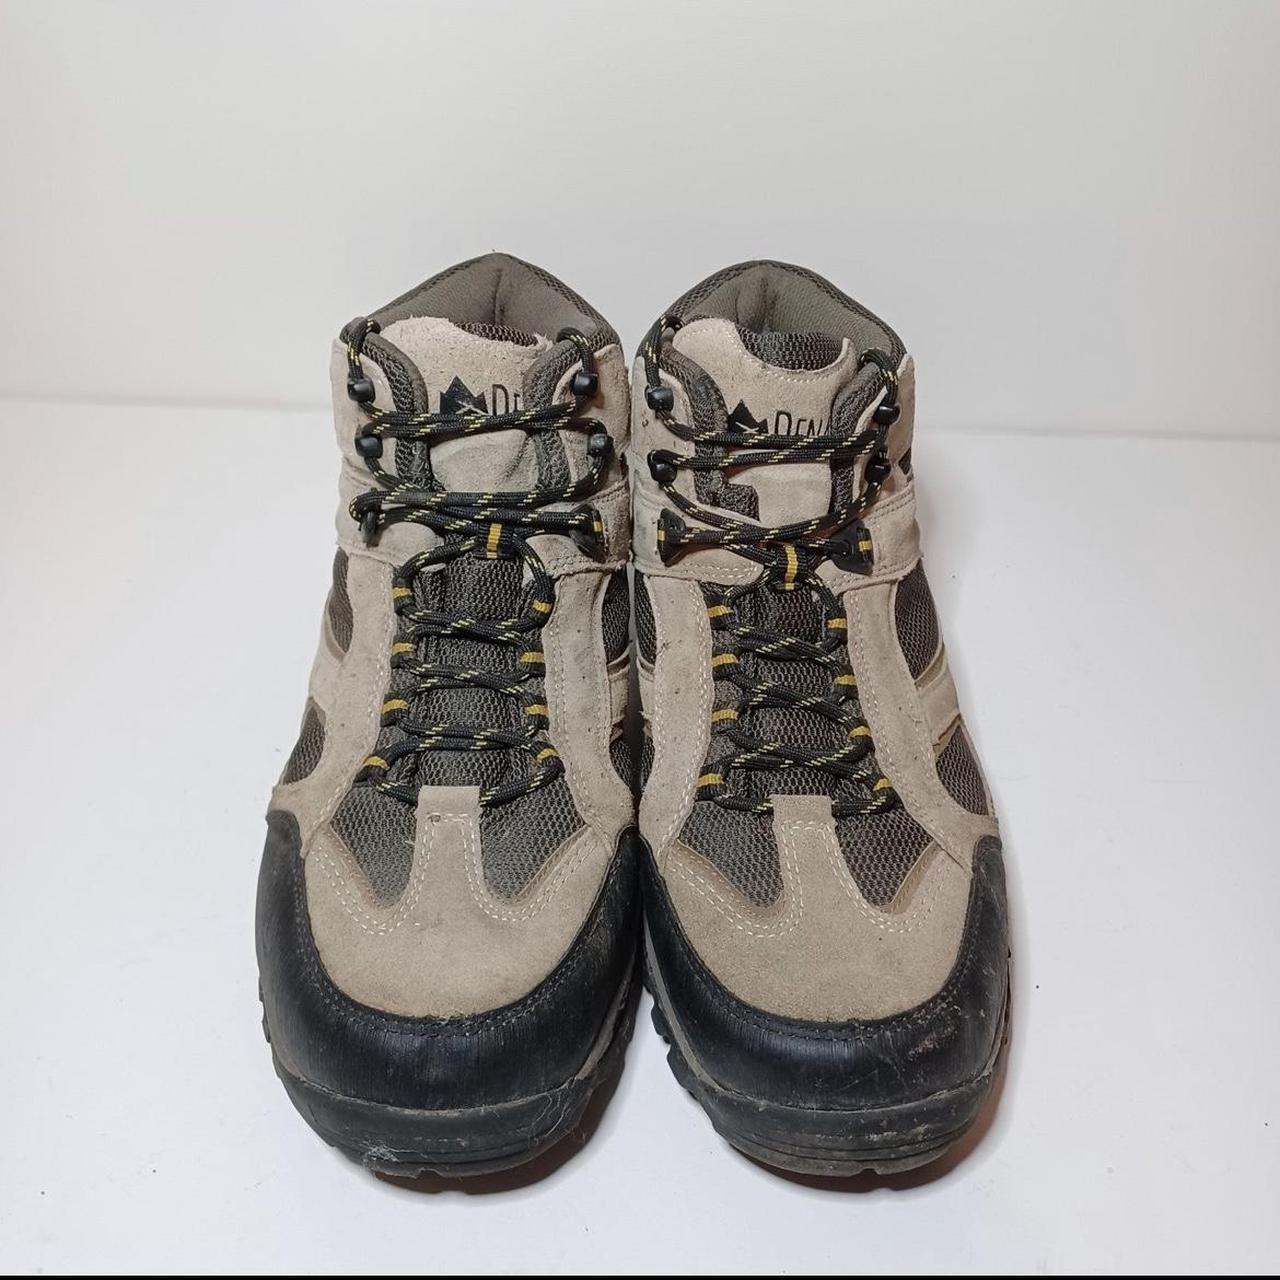 Denali Clearwater Tan Hiking Boots Shoes Mens size... - Depop